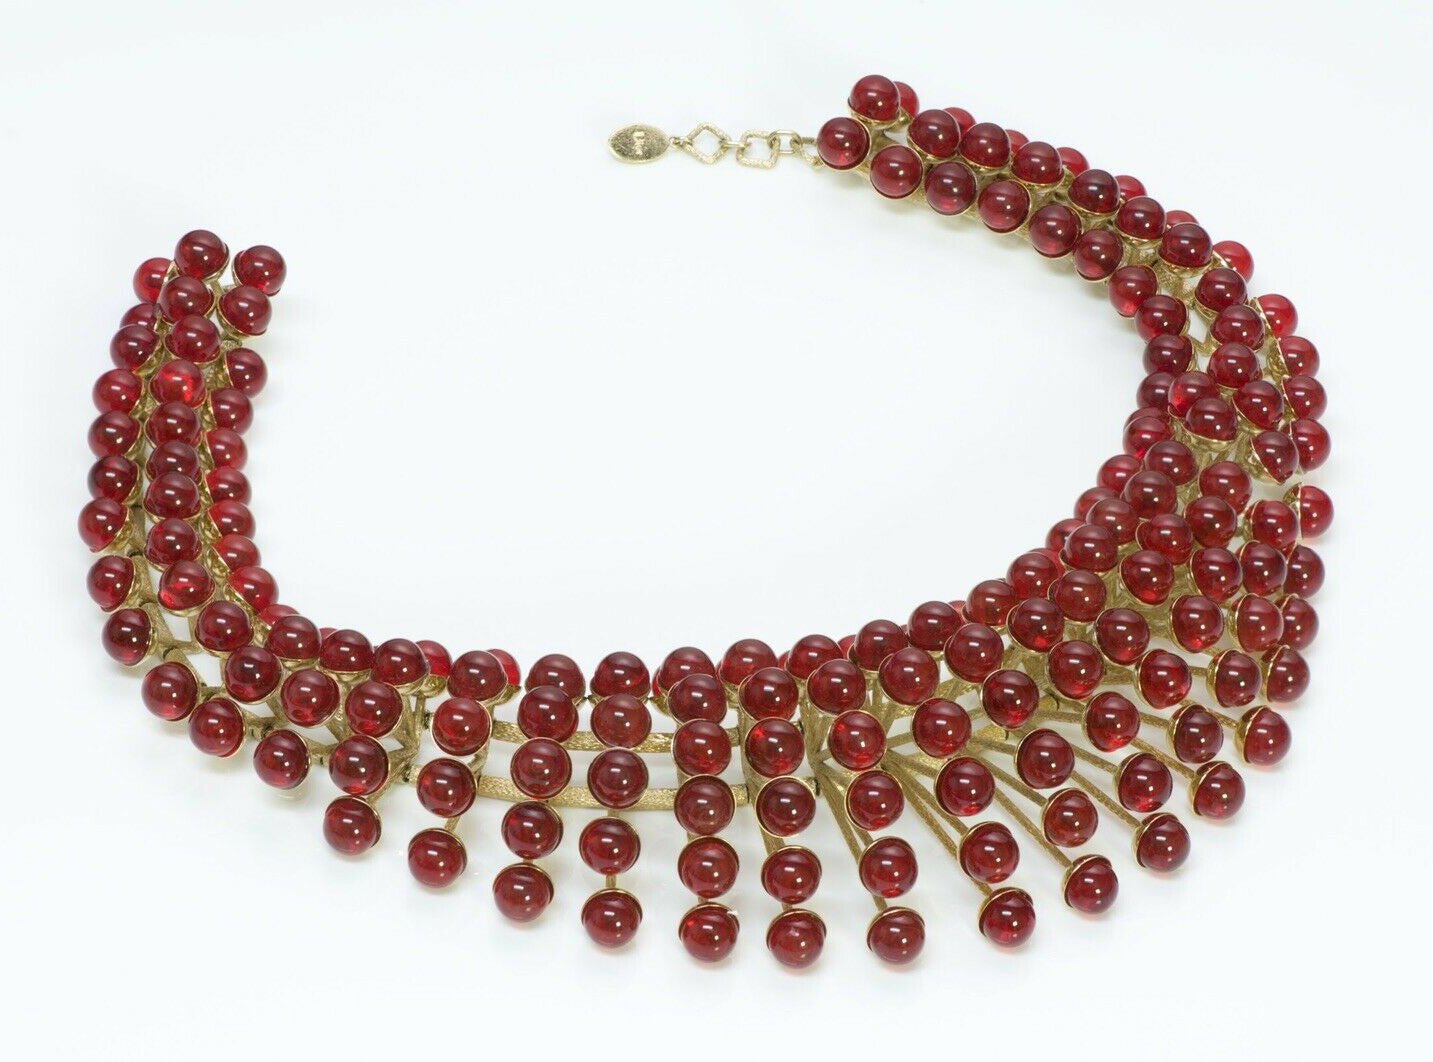 Christian Dior Couture 2012 Raf Simons Red Glass Collar Necklace